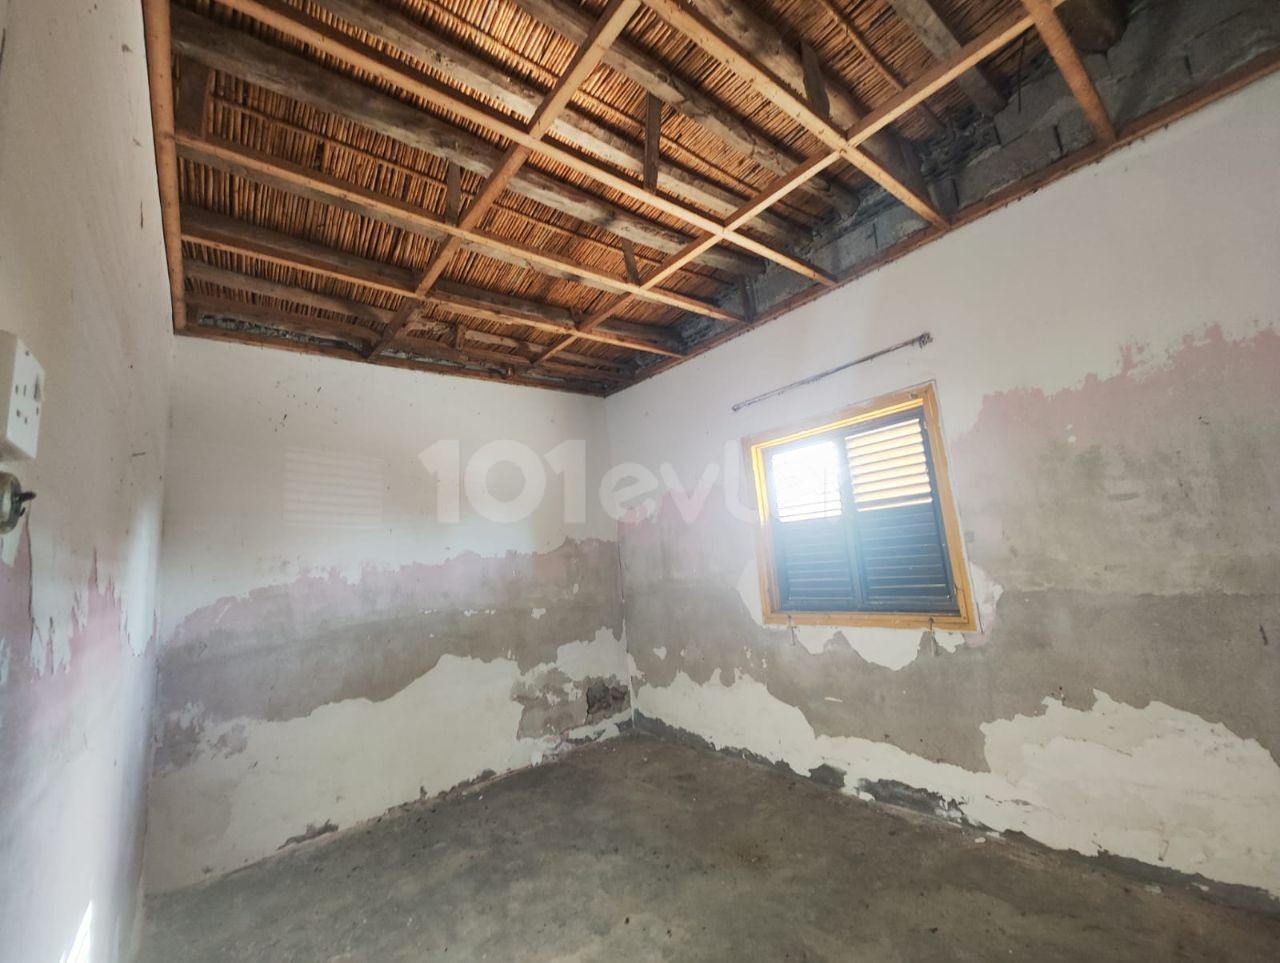 DETACHED HOUSE FOR SALE IN AKOVA VILLAGE BETWEEN GEÇİTKALE AND İSKELE